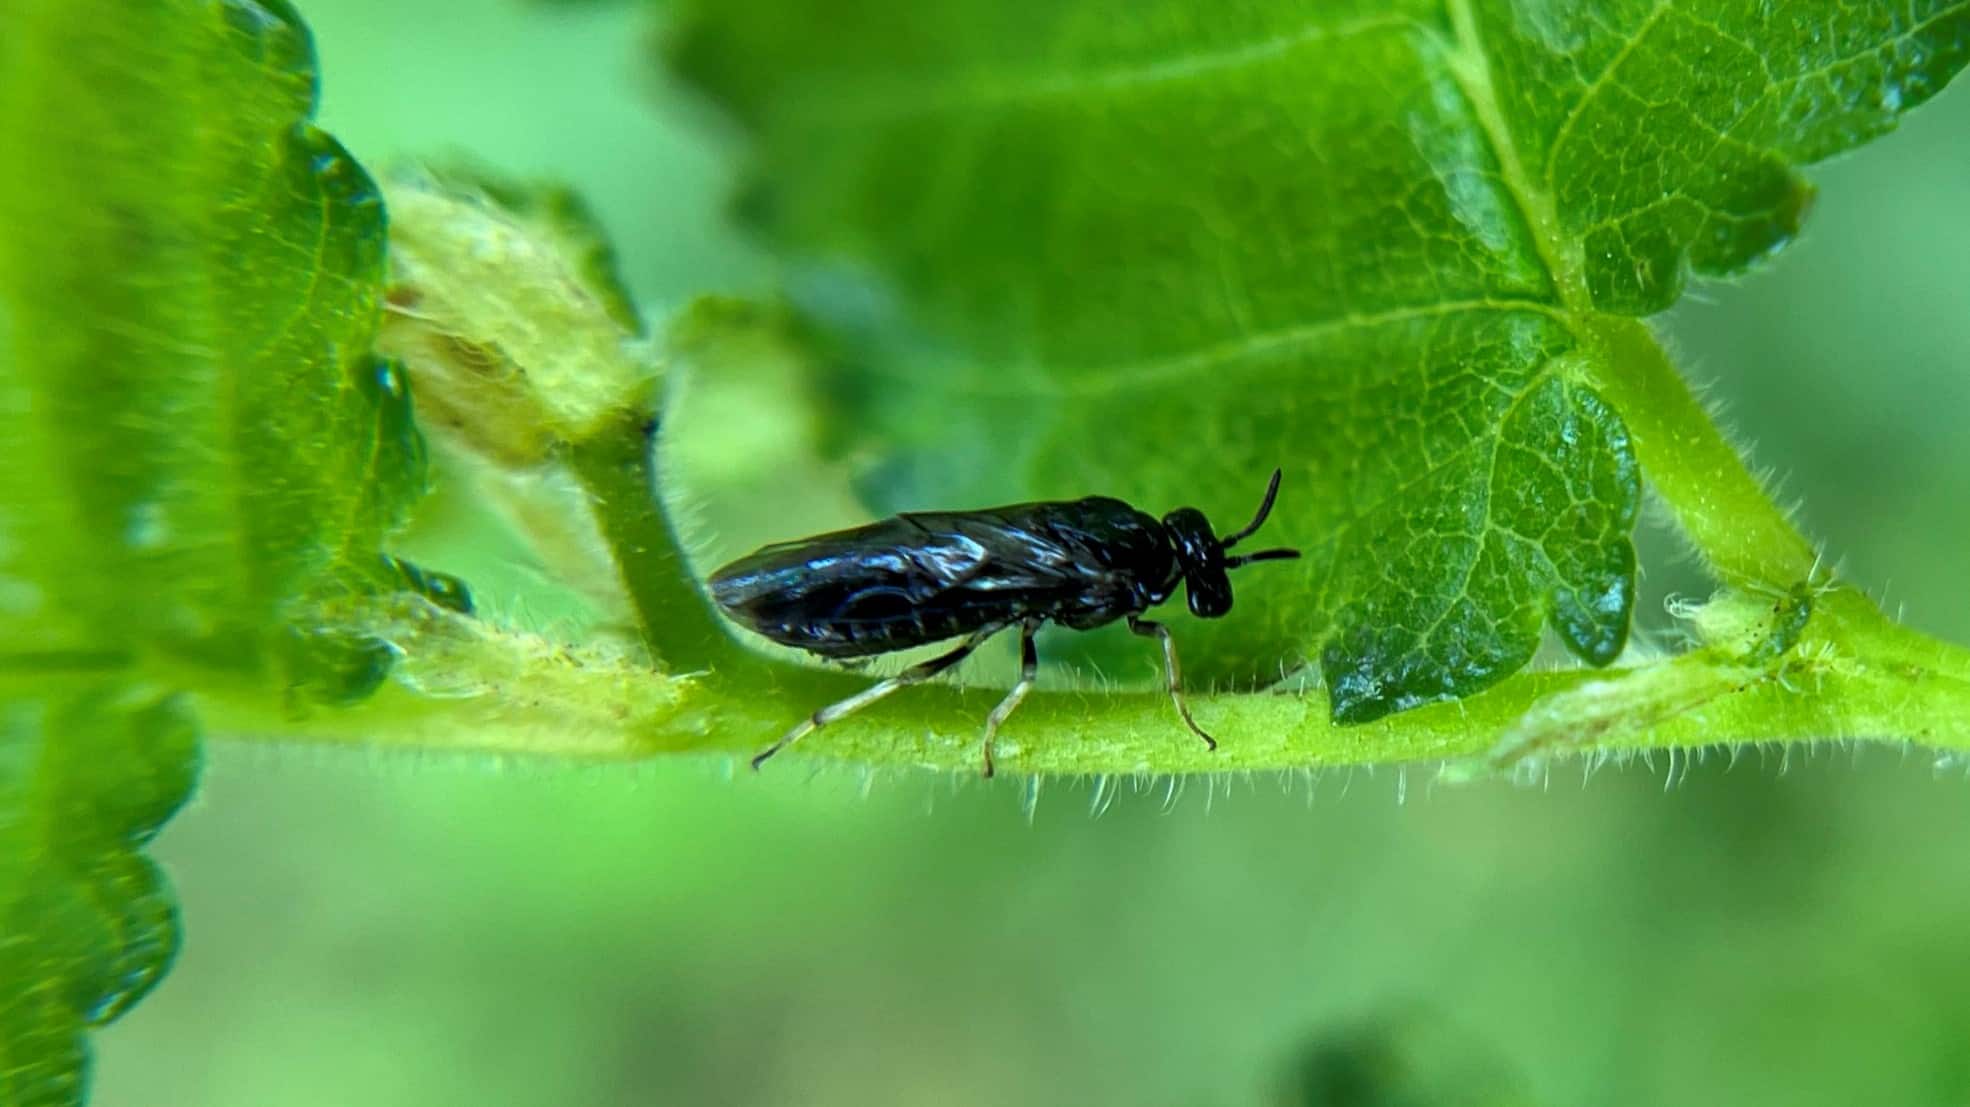 Elm zigzag sawfly - Researchers Tracking New Invasive Insect - College of Natural Resources at NC State University